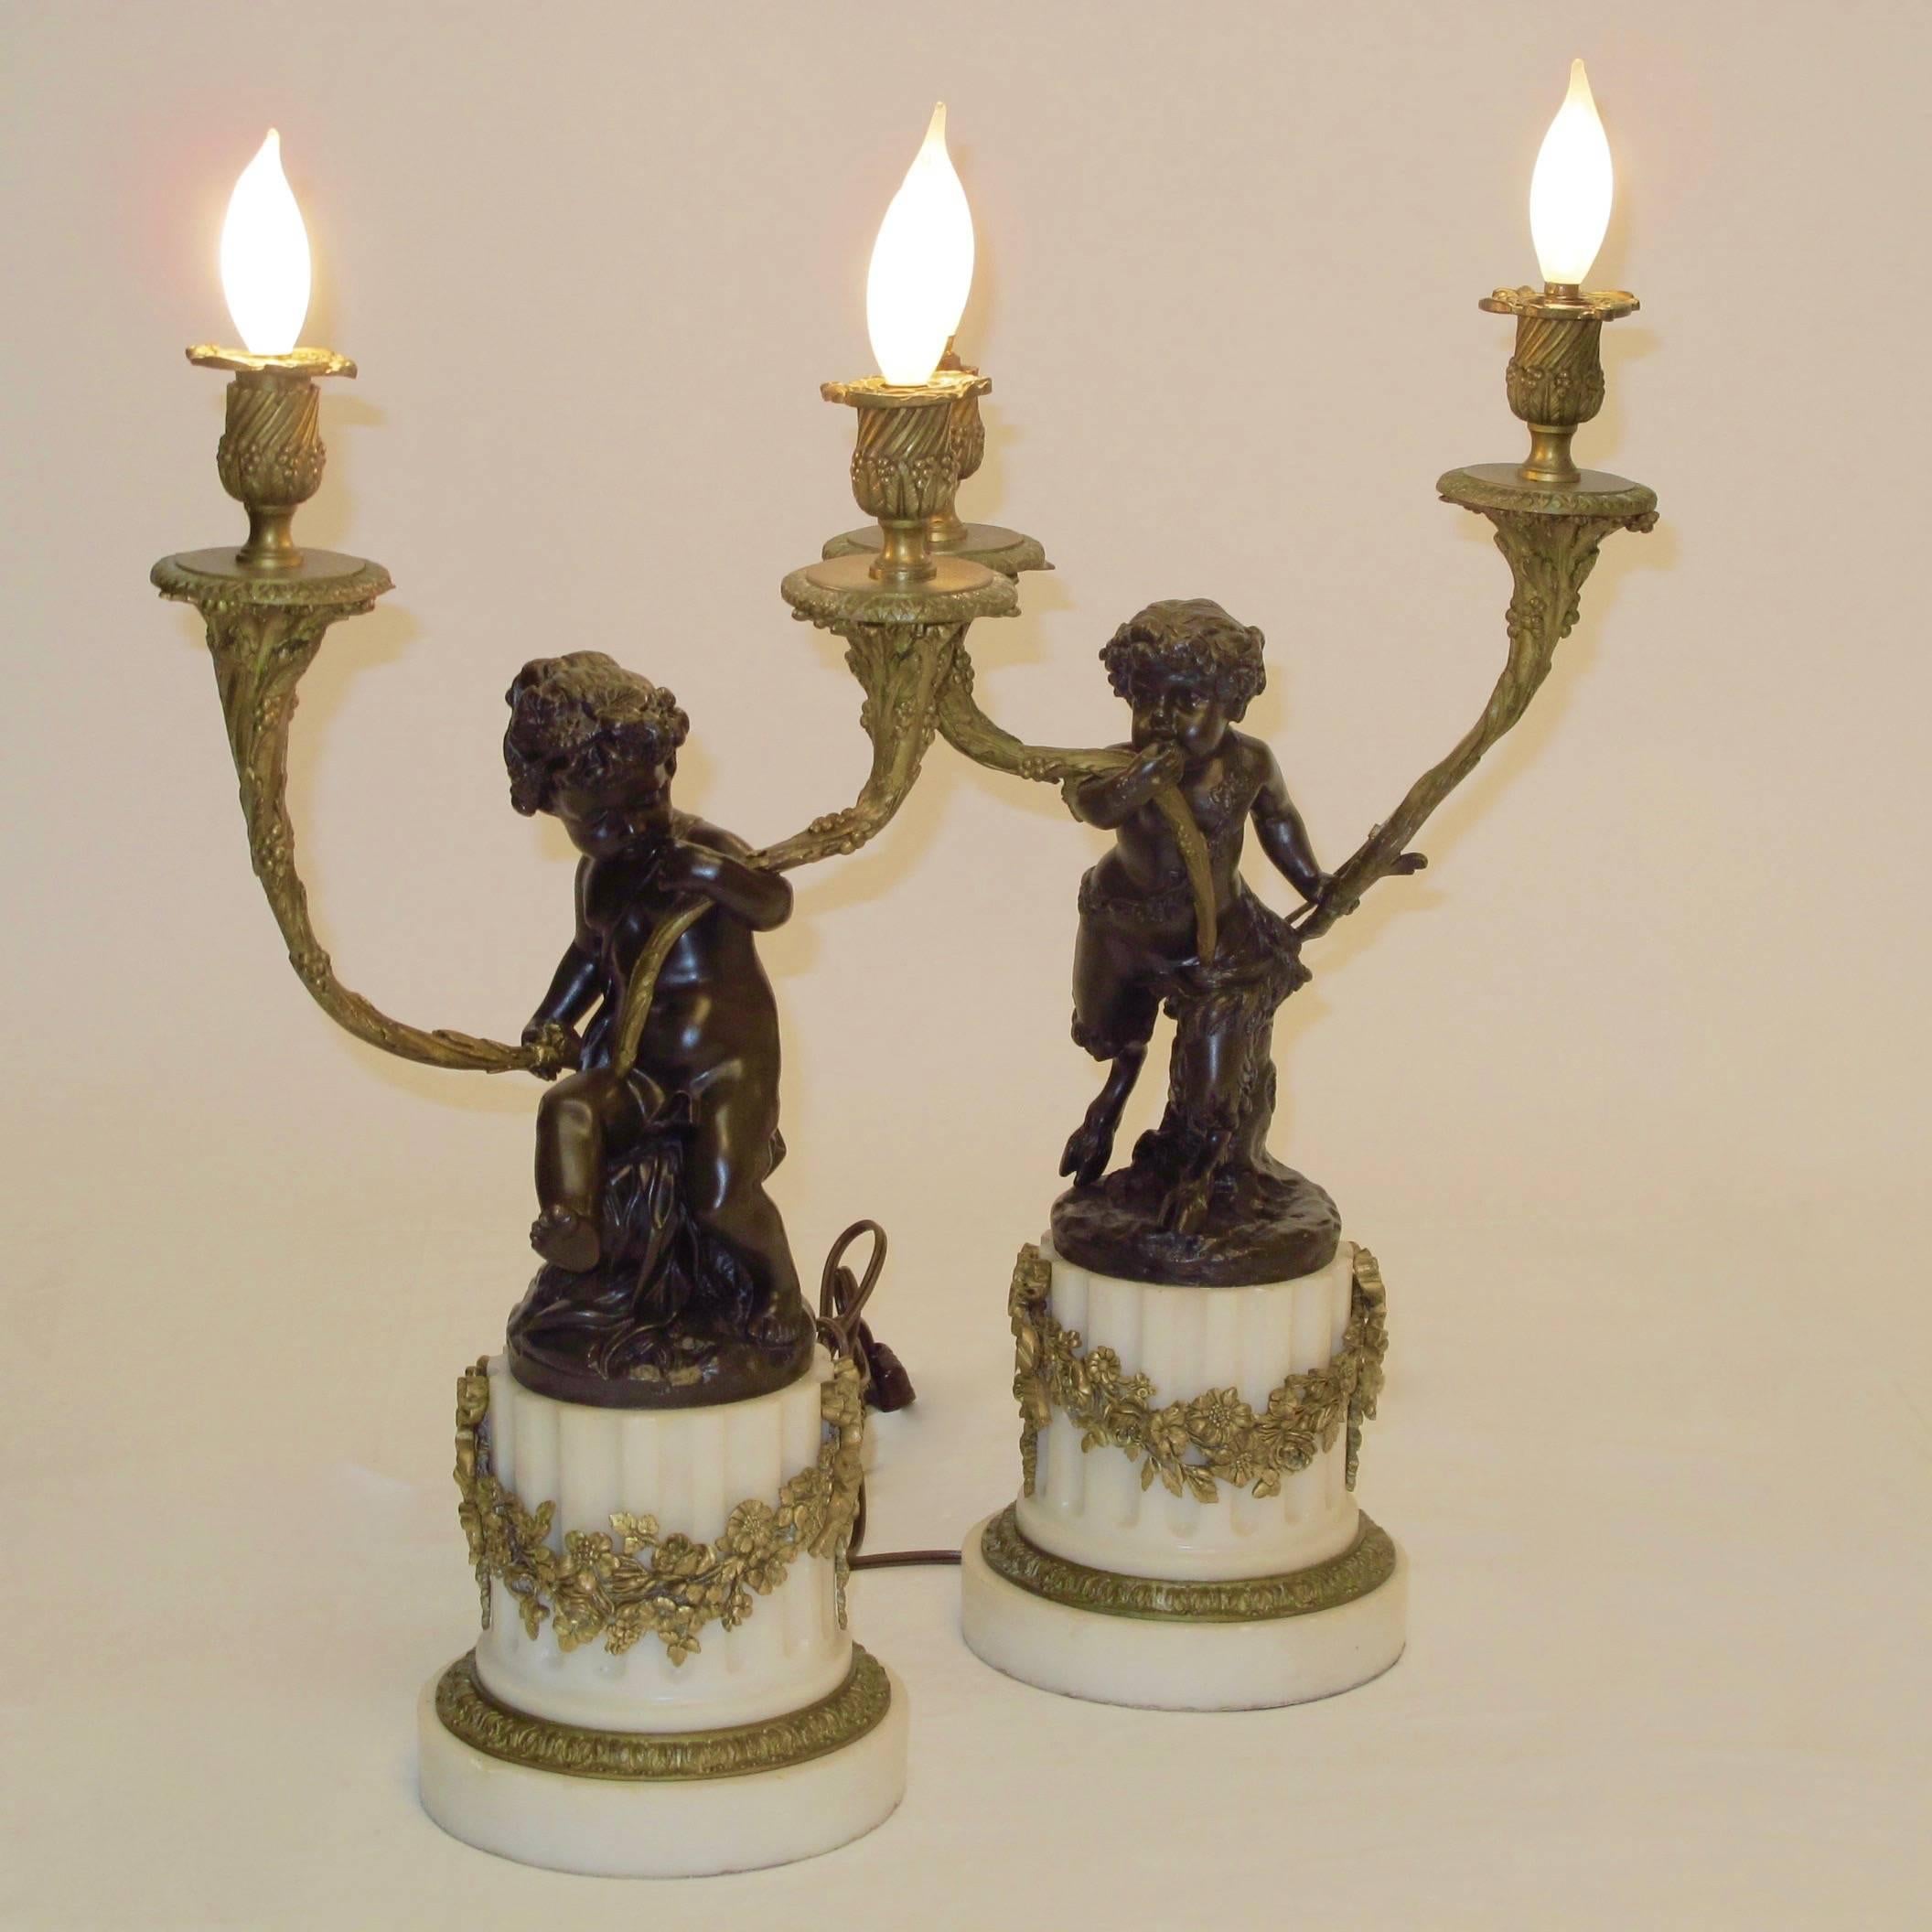 Finely cast bronze figural sculptures on marble bases with gilt bronze decoration. Recently re-wired and hold chandelier size light bulbs.

Claude Michel (December 20, 1738 – March 29, 1814), known as Clodion, was a French sculptor in the Rococo